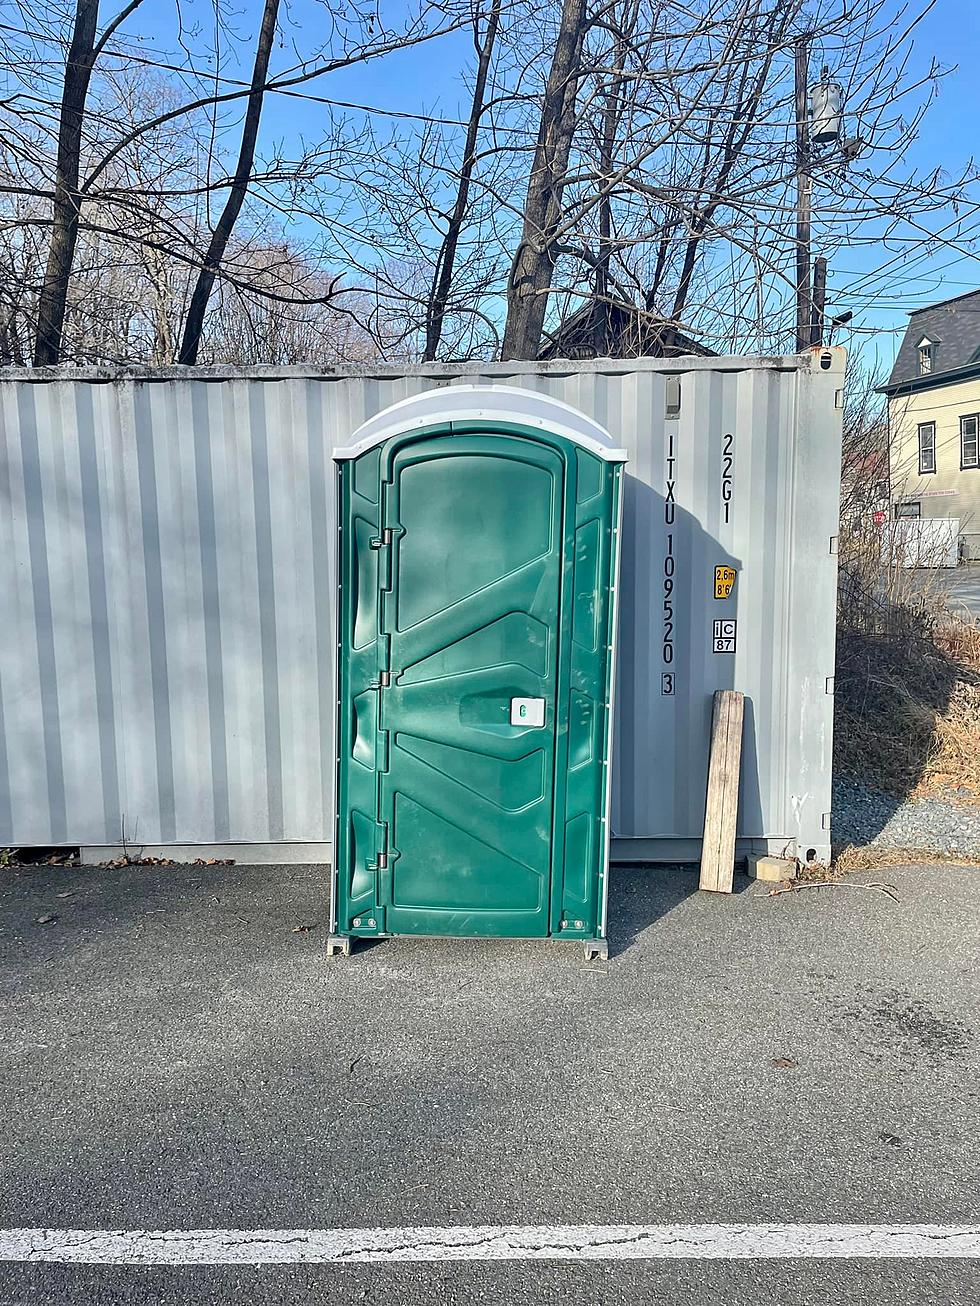 Porta Potty Predicament; &#8220;Whose Potty Is This?&#8221; Ellsworth Man Wants To Know.